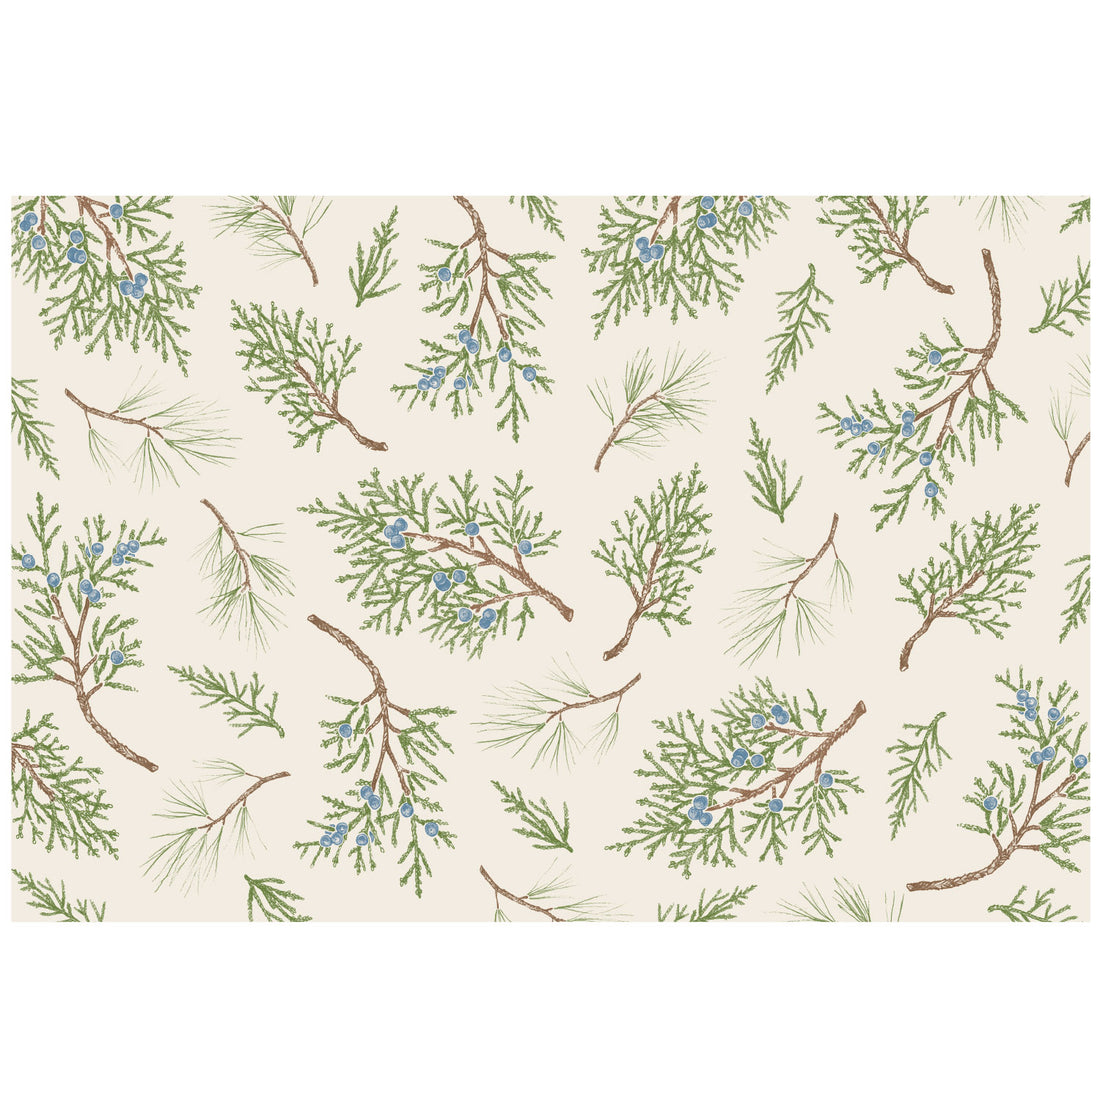 An illustrated scatter of green and brown juniper and pine sprigs with small blue berries, over a white background.